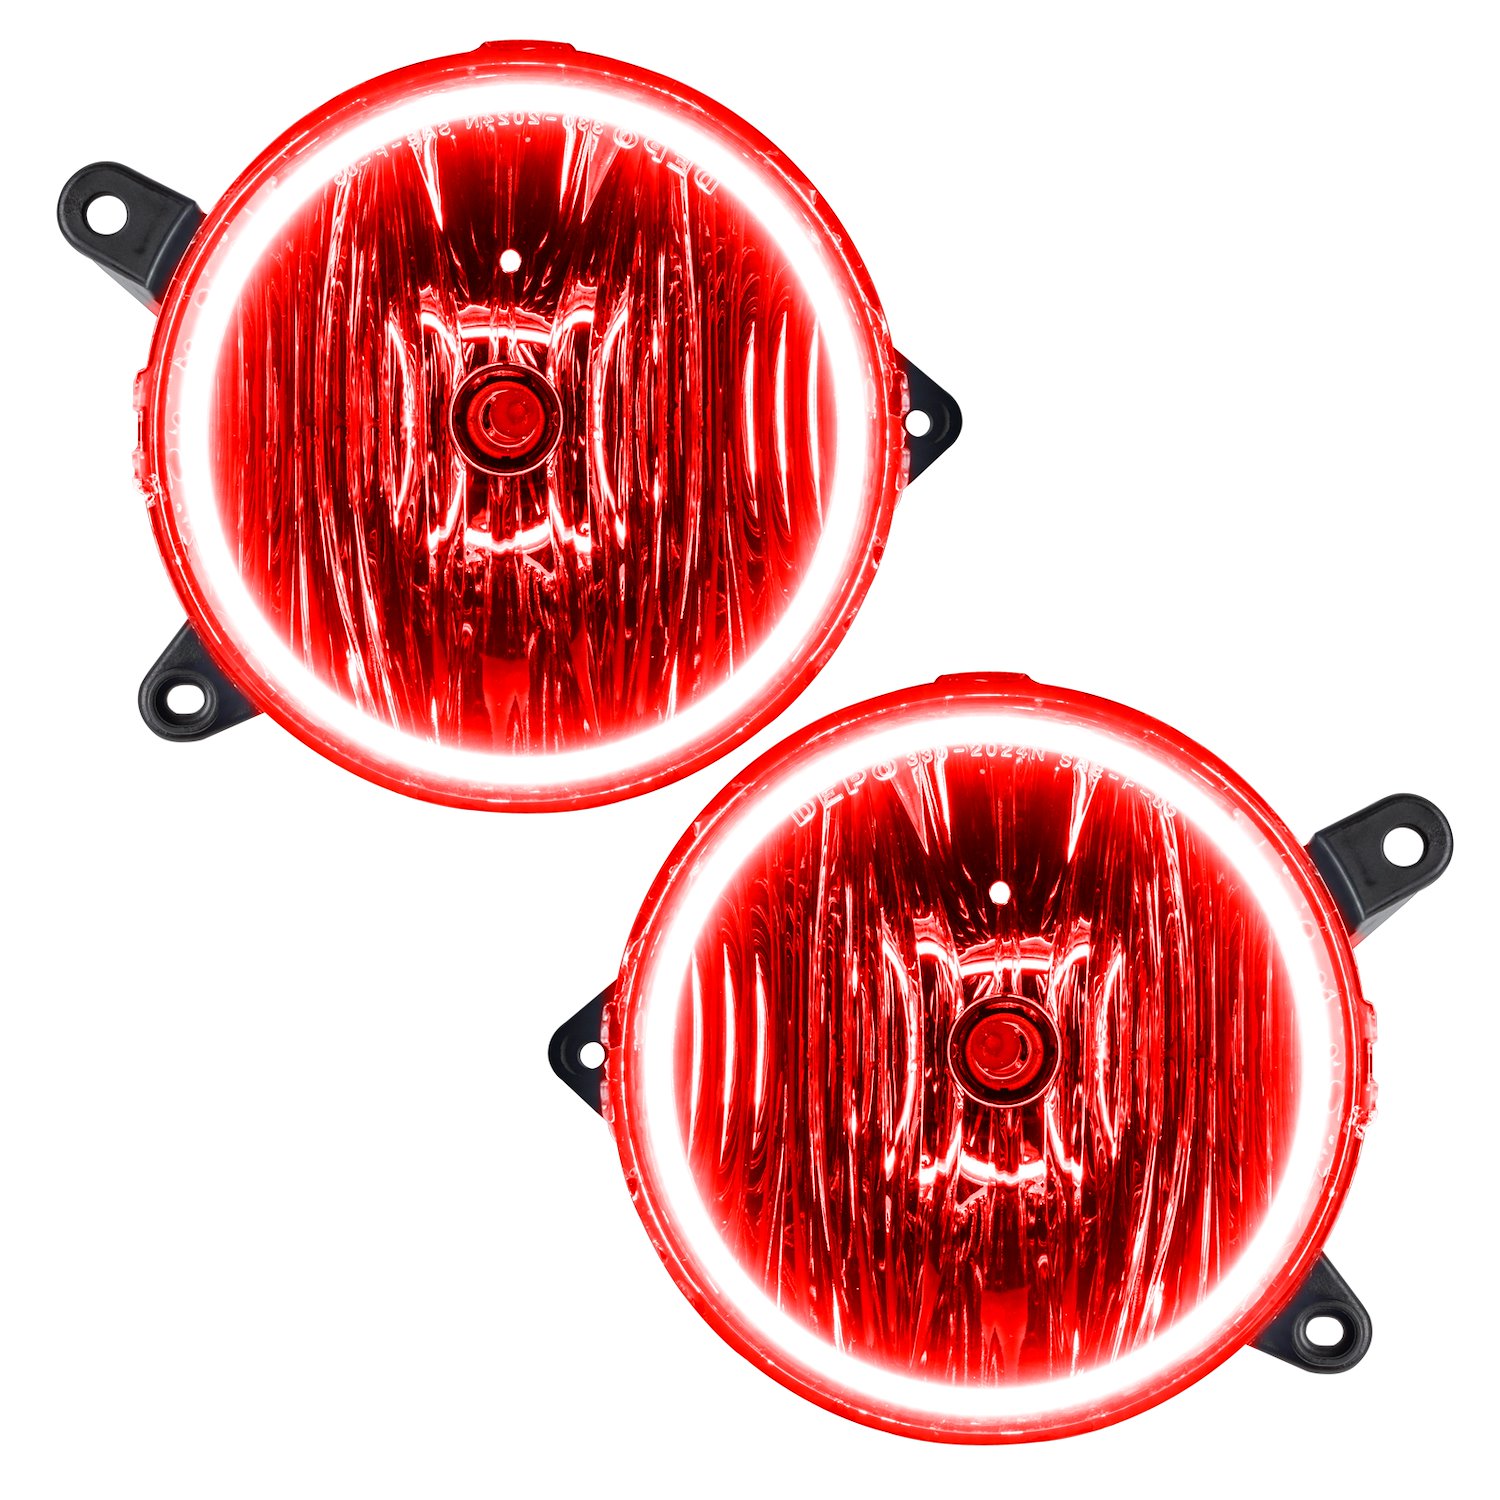 LED HALO Fog Light Assembly for 2010-2012 Ford Mustang GT Coupe/Convertible - Red